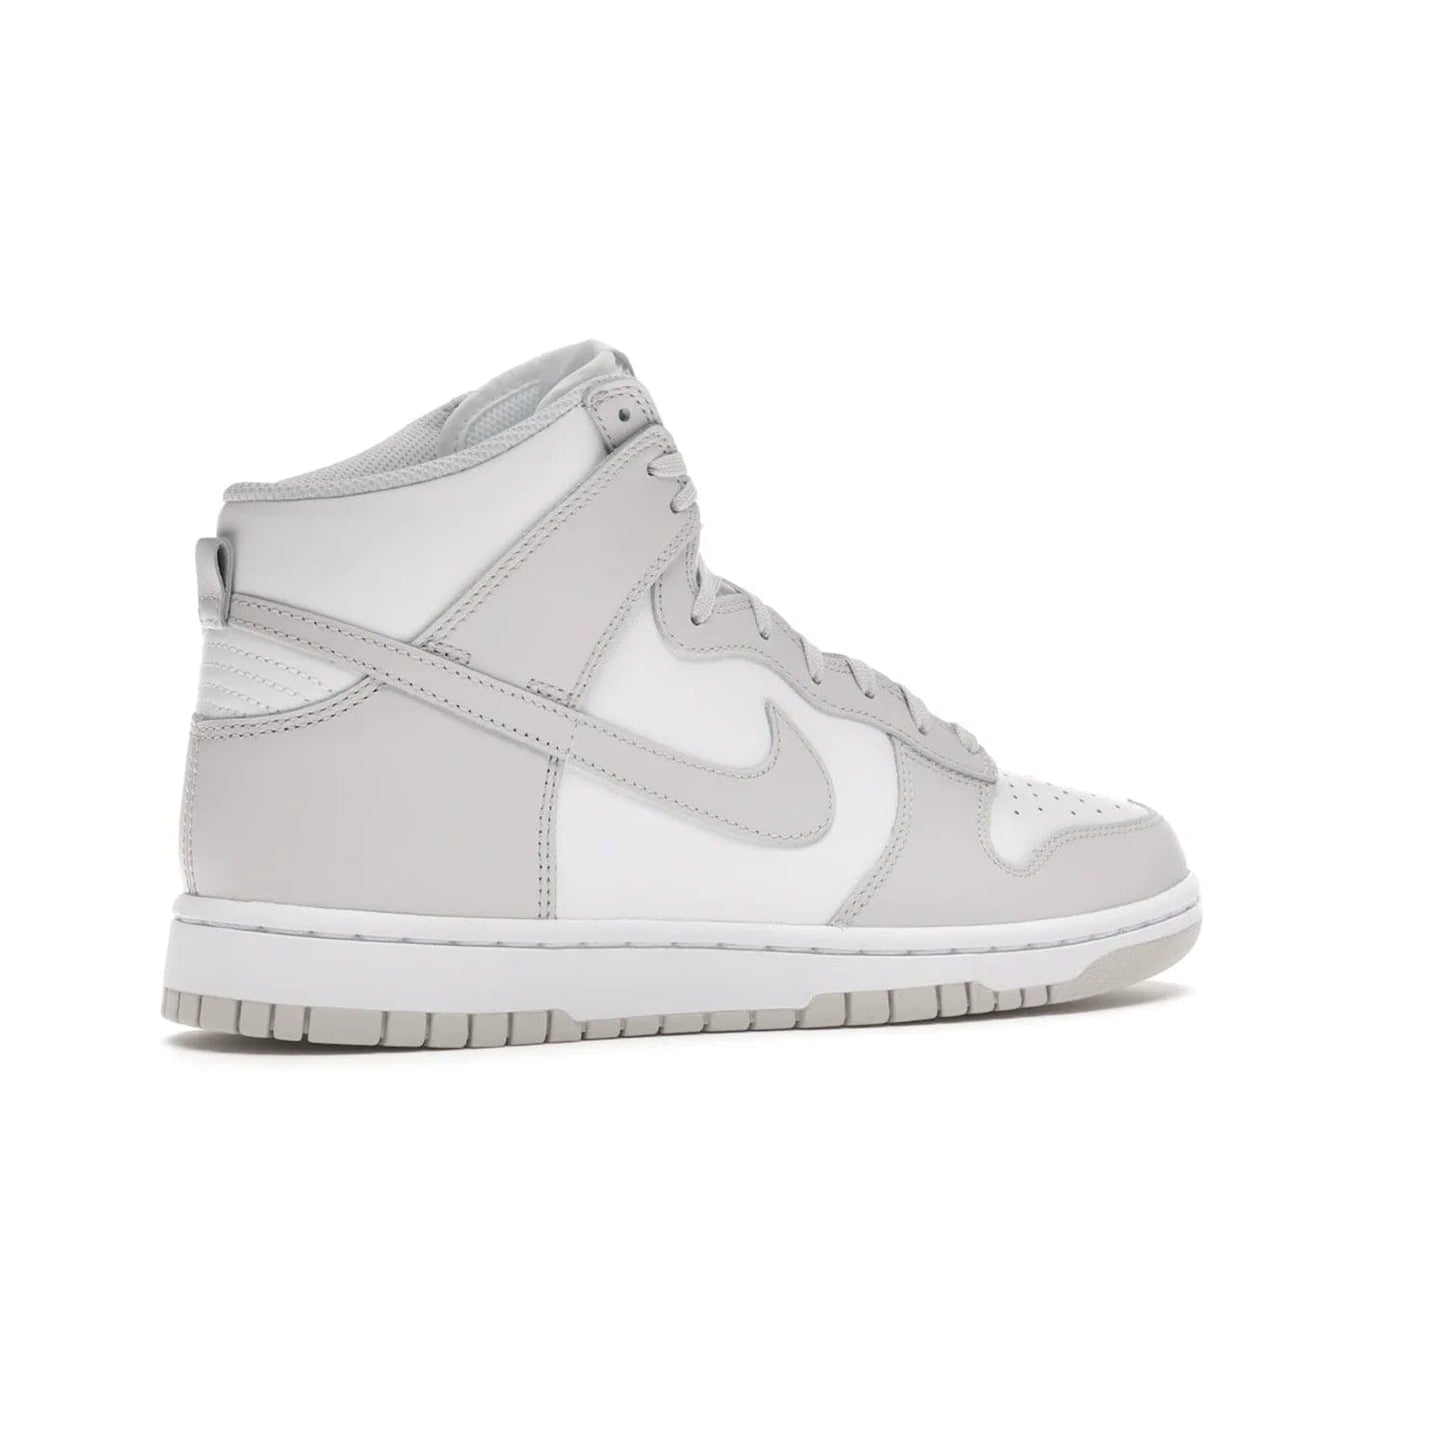 Nike Dunk High Retro White Vast Grey (2021) - Image 34 - Only at www.BallersClubKickz.com - Nike Dunk High Retro White Vast Grey 2021: classic '80s basketball sneaker with a crisp white base, grey overlays, midsole tooling and outsole. Dropped Feb. 2021.